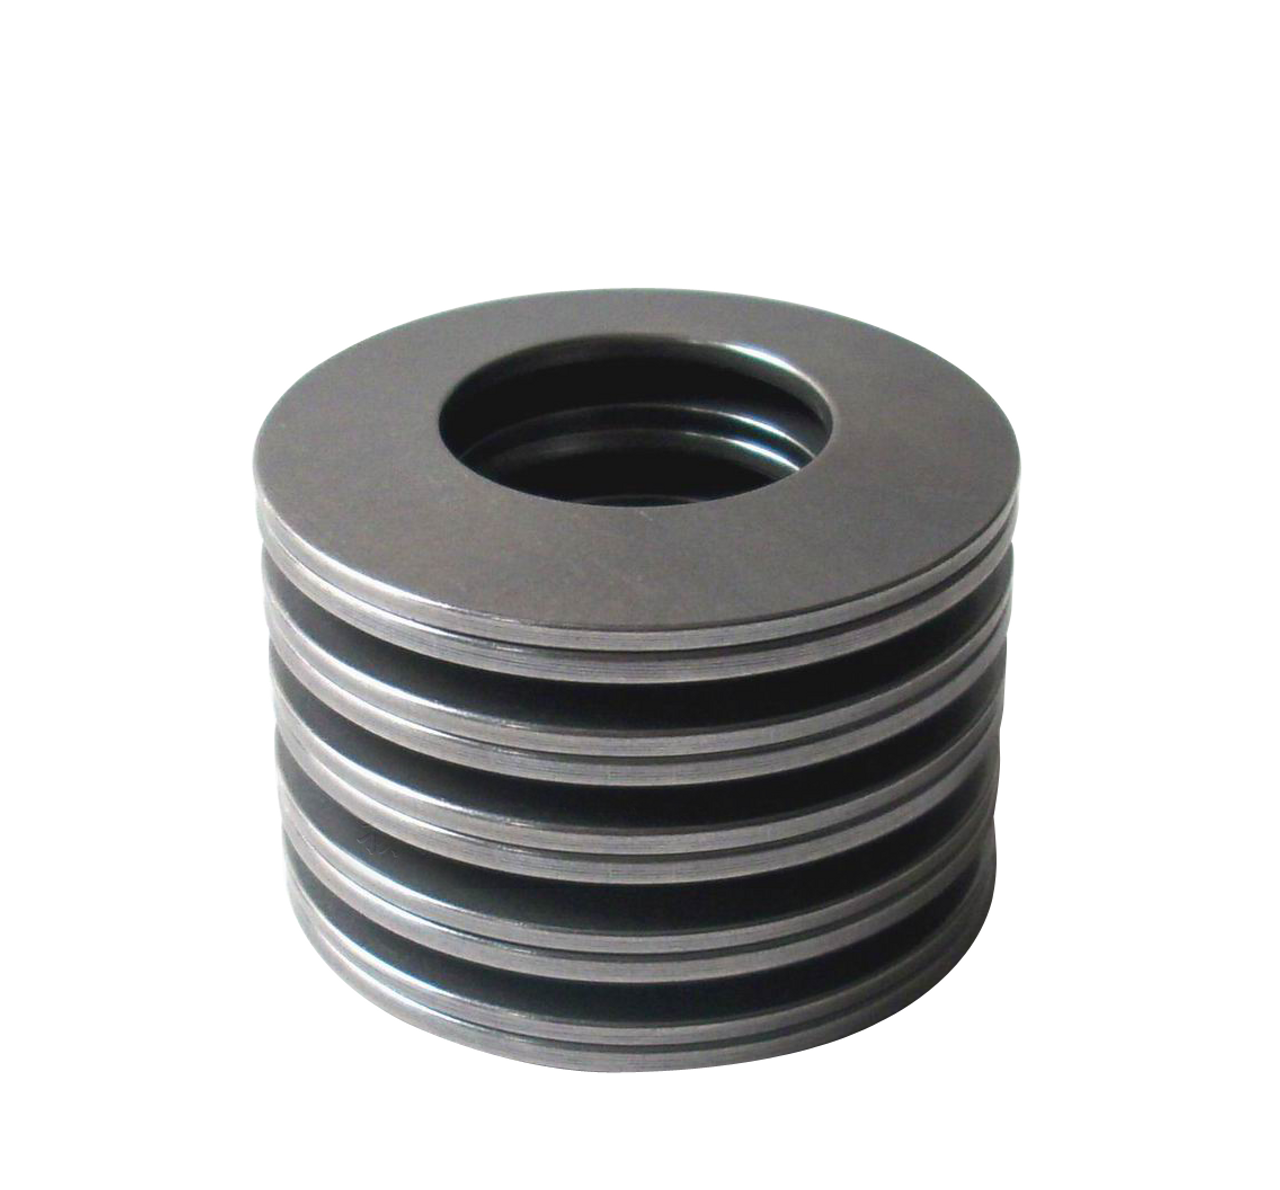 50mm Disc Spring (DIN 2093) Conical Washer  DS051.0-100-06